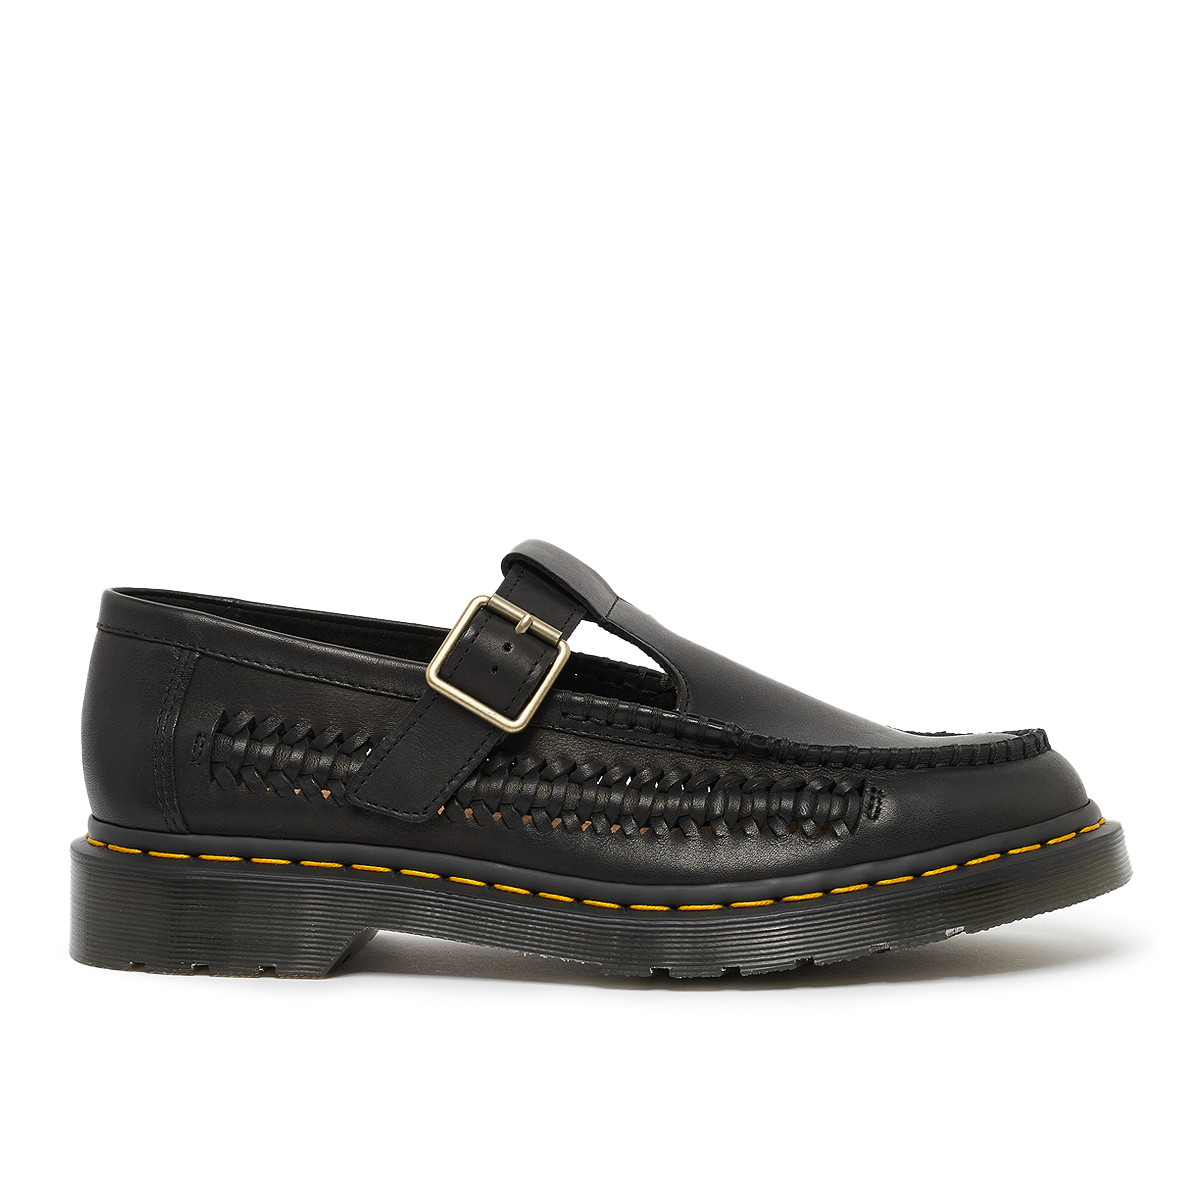 Dr Martens Coombs II Stivaletti neri - 31622001